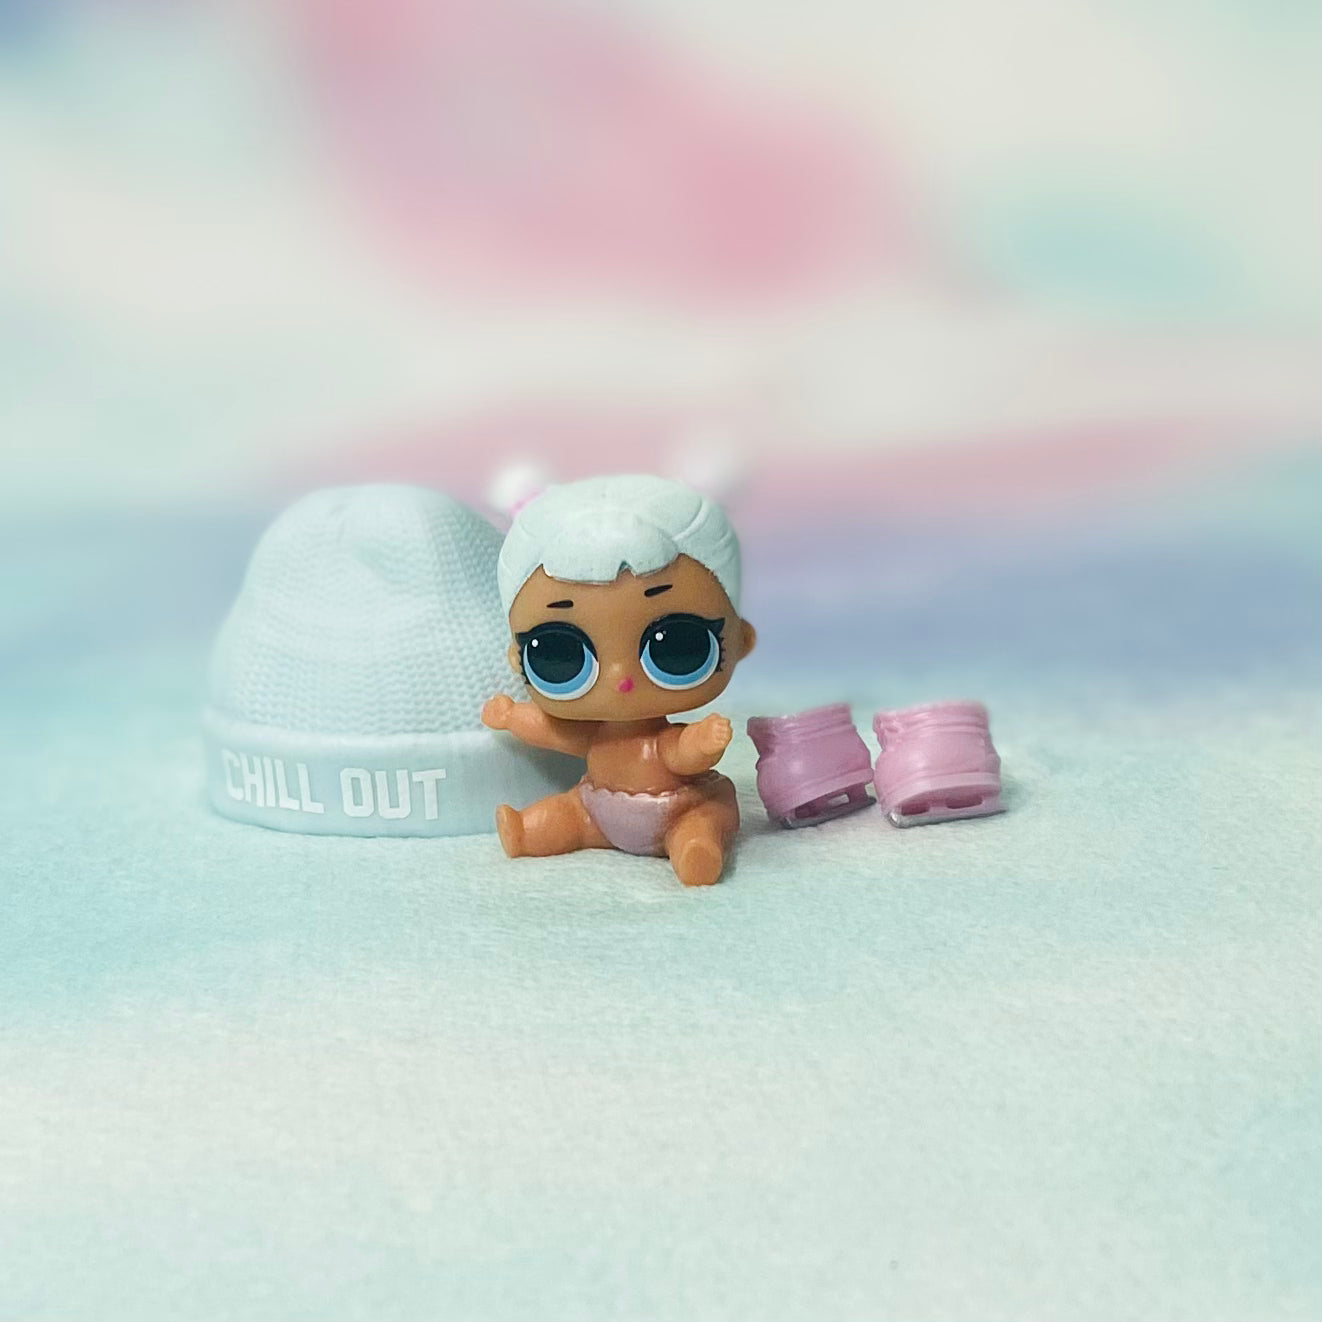 Lil Snow Angel LOL Surprise Doll Series 2 Chill Out Club (2-077)